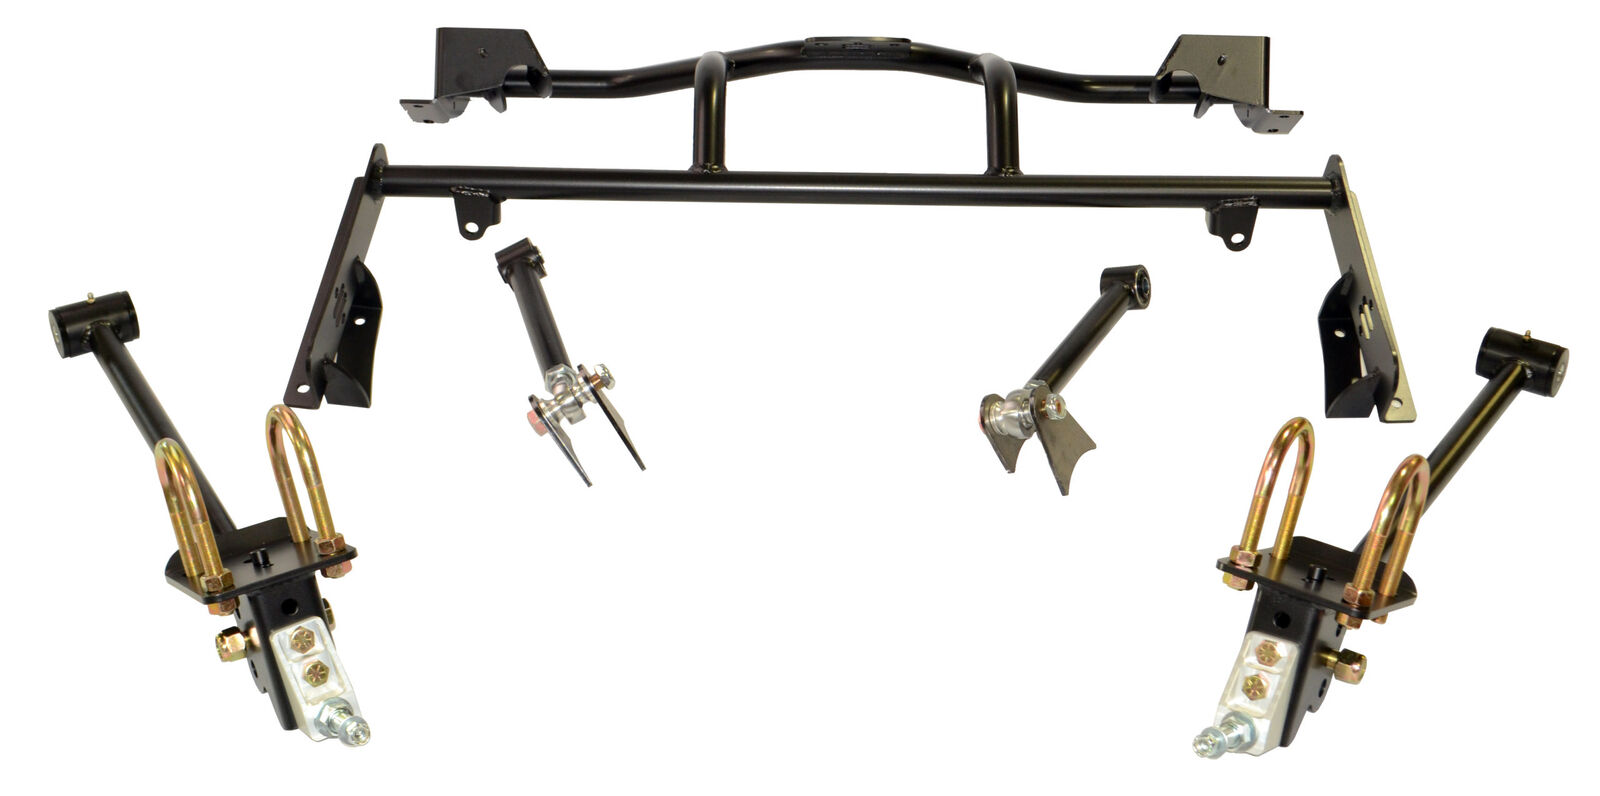 Ridetech for 64-70 Ford Mustang Bolt-On 4 Link System